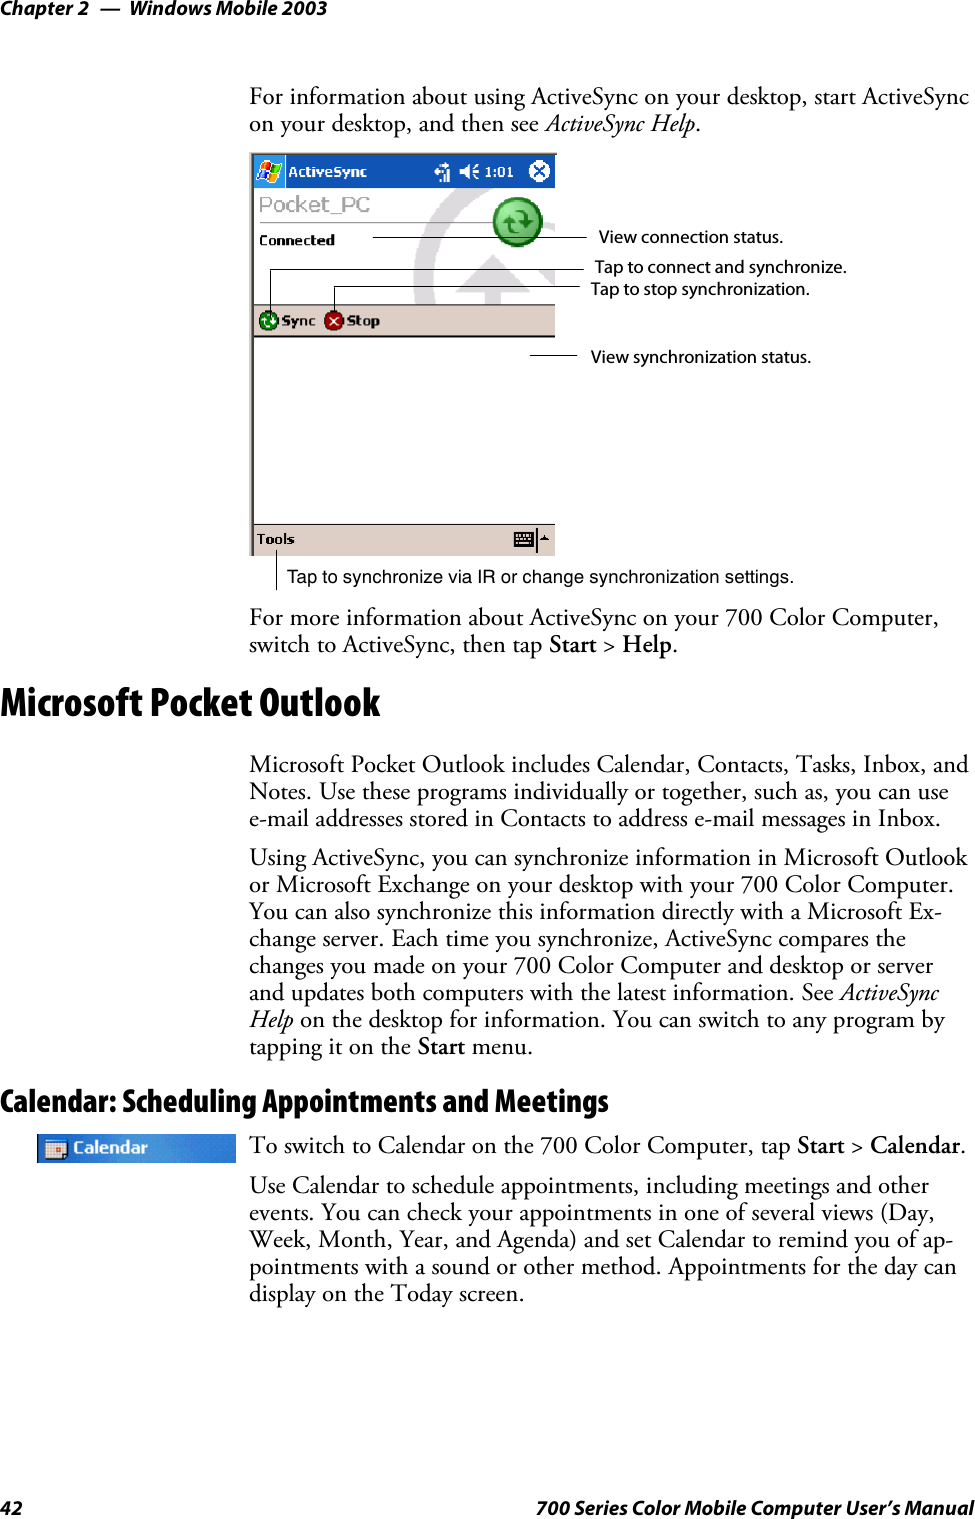 Windows Mobile 2003Chapter —242 700 Series Color Mobile Computer User’s ManualFor information about using ActiveSync on your desktop, start ActiveSyncon your desktop, and then see ActiveSync Help.Tap to synchronize via IR or change synchronization settings.View connection status.Tap to connect and synchronize.Taptostopsynchronization.View synchronization status.For more information about ActiveSync on your 700 Color Computer,switch to ActiveSync, then tap Start &gt;Help.Microsoft Pocket OutlookMicrosoft Pocket Outlook includes Calendar, Contacts, Tasks, Inbox, andNotes. Use these programs individually or together, such as, you can usee-mailaddressesstoredinContactstoaddresse-mailmessagesinInbox.Using ActiveSync, you can synchronize information in Microsoft Outlookor Microsoft Exchange on your desktop with your 700 Color Computer.You can also synchronize this information directly with a Microsoft Ex-change server. Each time you synchronize, ActiveSync compares thechanges you made on your 700 Color Computer and desktop or serverand updates both computers with the latest information. See ActiveSyncHelp on the desktop for information. You can switch to any program bytapping it on the Start menu.Calendar: Scheduling Appointments and MeetingsTo switch to Calendar on the 700 Color Computer, tap Start &gt;Calendar.Use Calendar to schedule appointments, including meetings and otherevents. You can check your appointments in one of several views (Day,Week, Month, Year, and Agenda) and set Calendar to remind you of ap-pointments with a sound or other method. Appointments for the day candisplay on the Today screen.